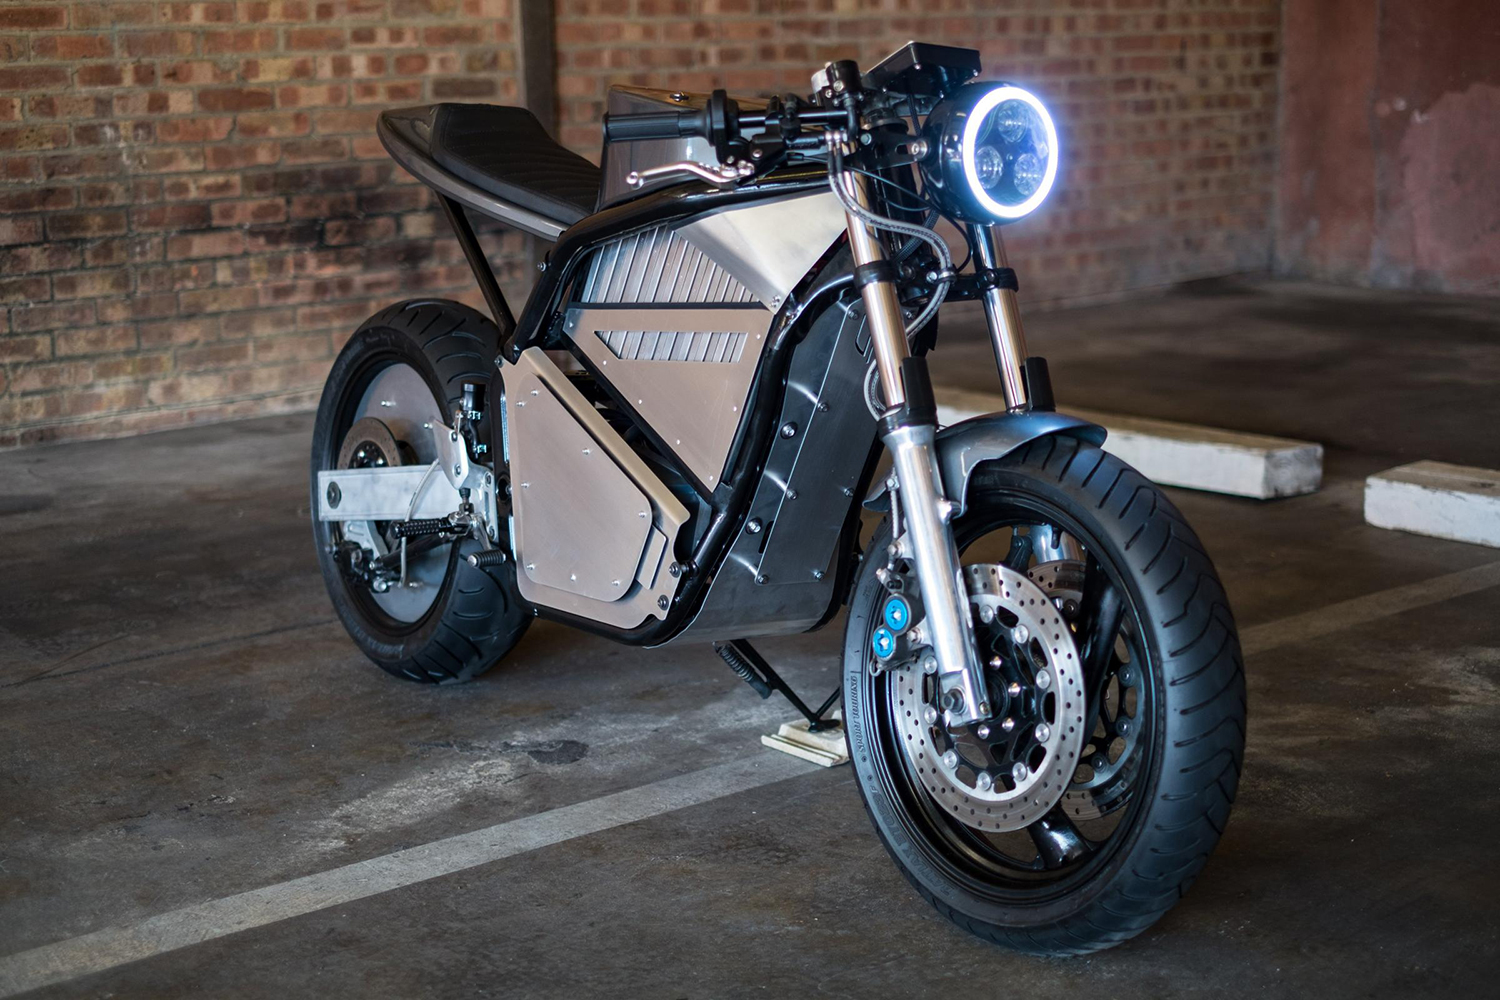 union motion phase type 1 electric motorcycle 01